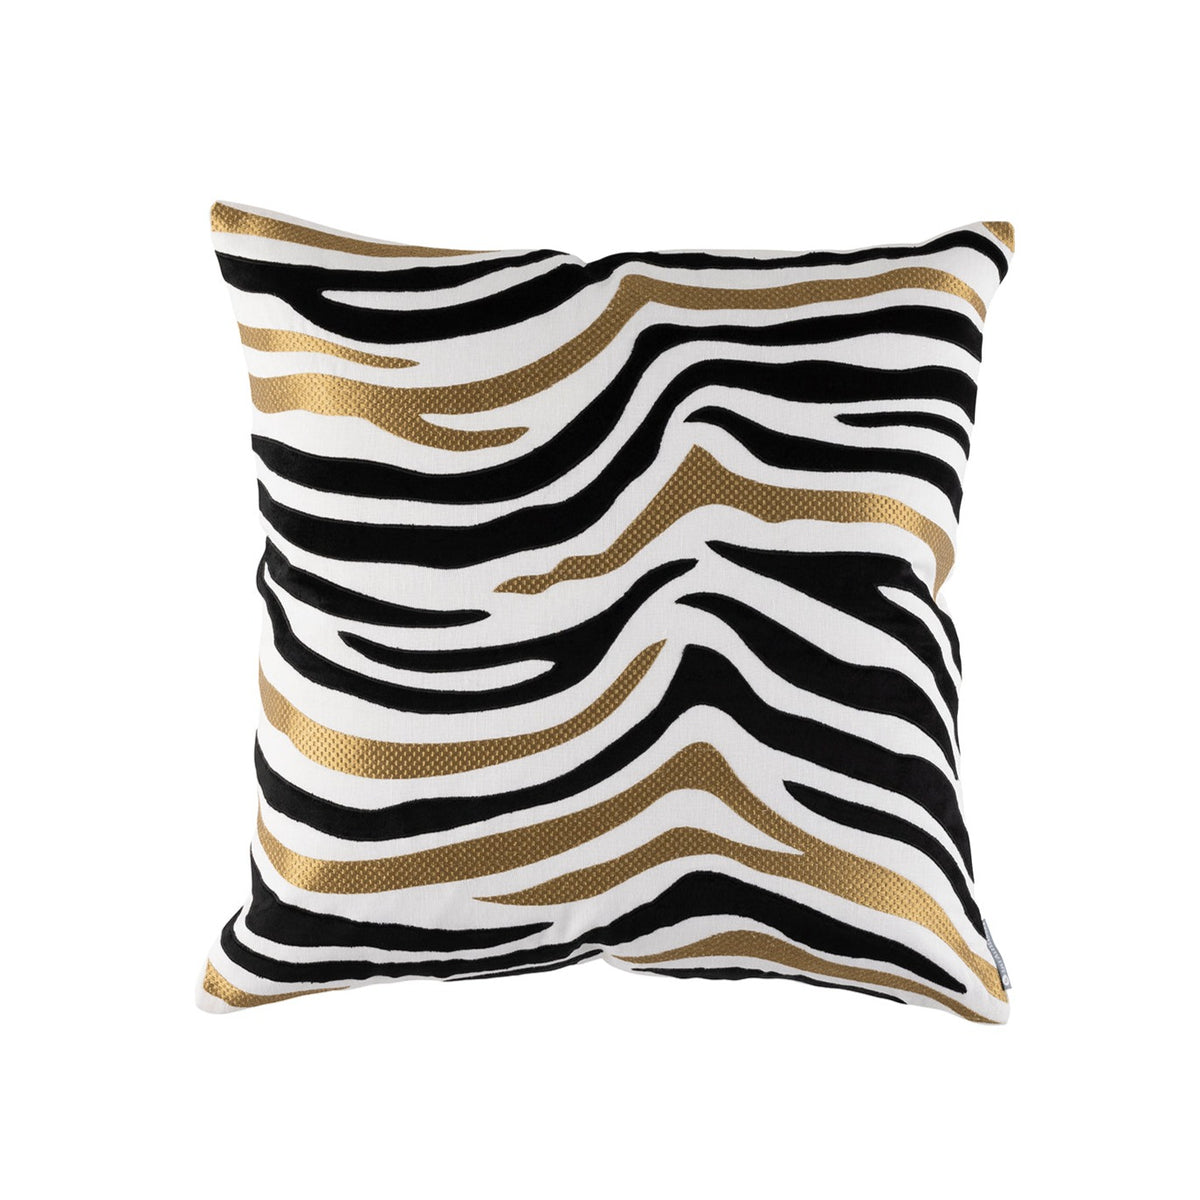 Lili Alessandra Tiger Square Pillow White / Black / Gold 22x22 at Fig Linens and Home